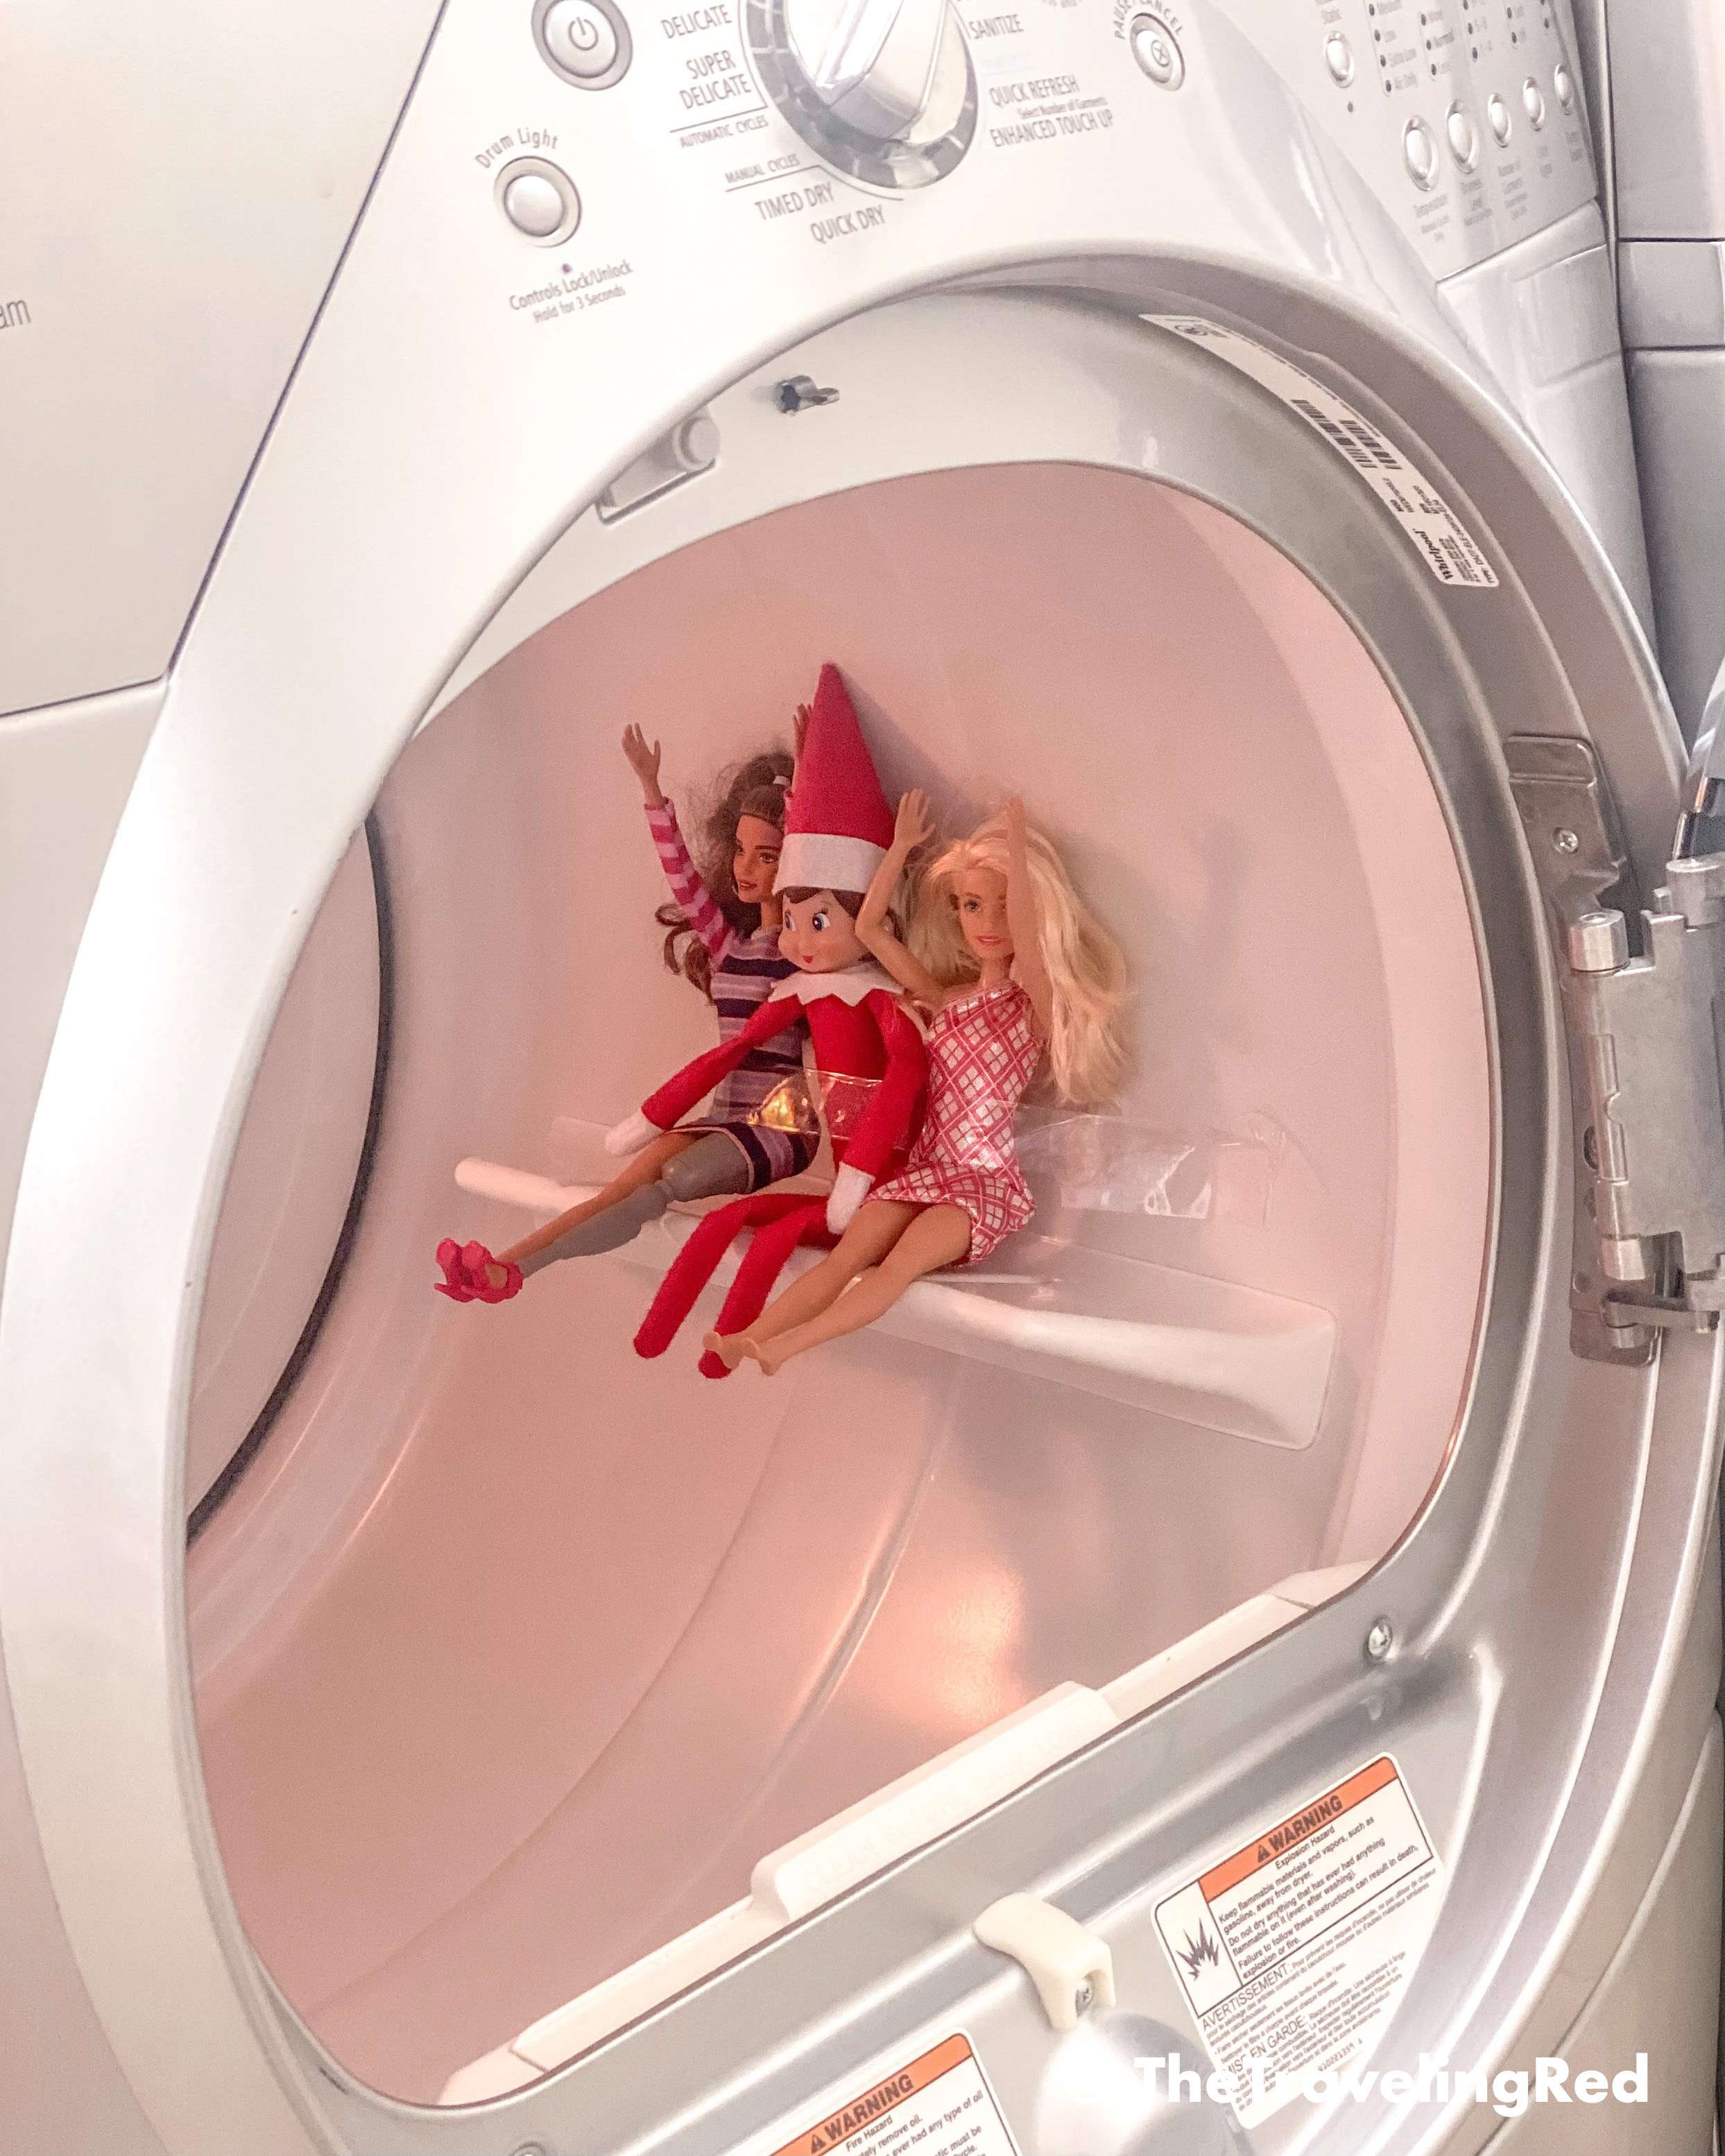 Naughty Elf on the shelf turned our dryer into an amusement park ride and took some barbies along for the fun. You only need tape. Fun and easy elf on the shelf ideas for a naughty elf that are quick and easy using things you have at home.